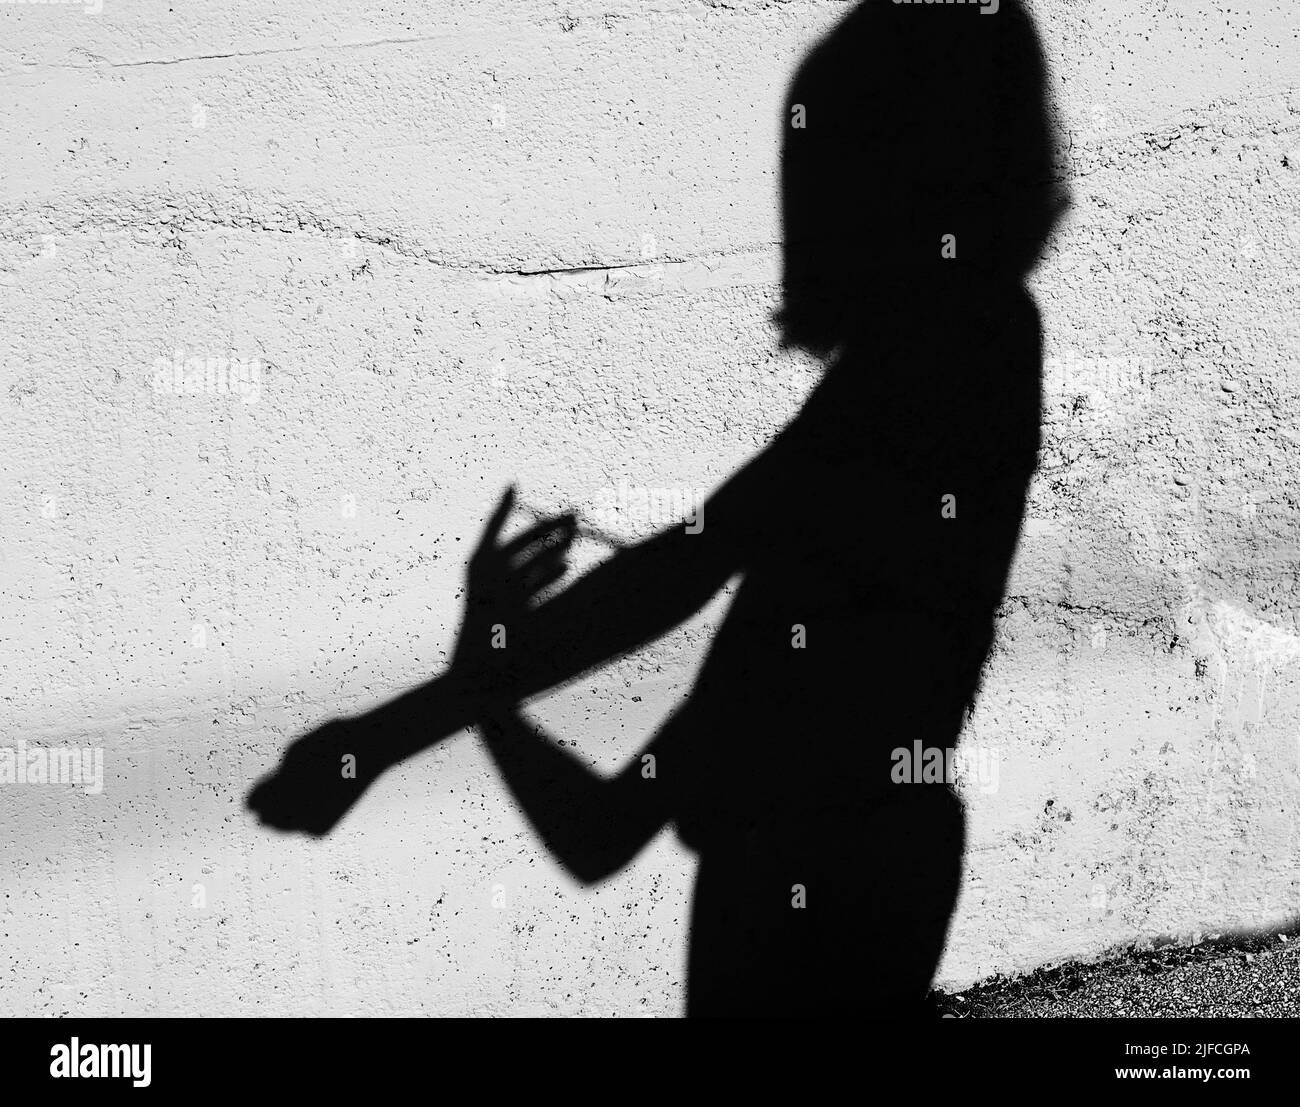 Black Shadow on the wall of a drug addict boy during injection with syringe in the city suburb Stock Photo